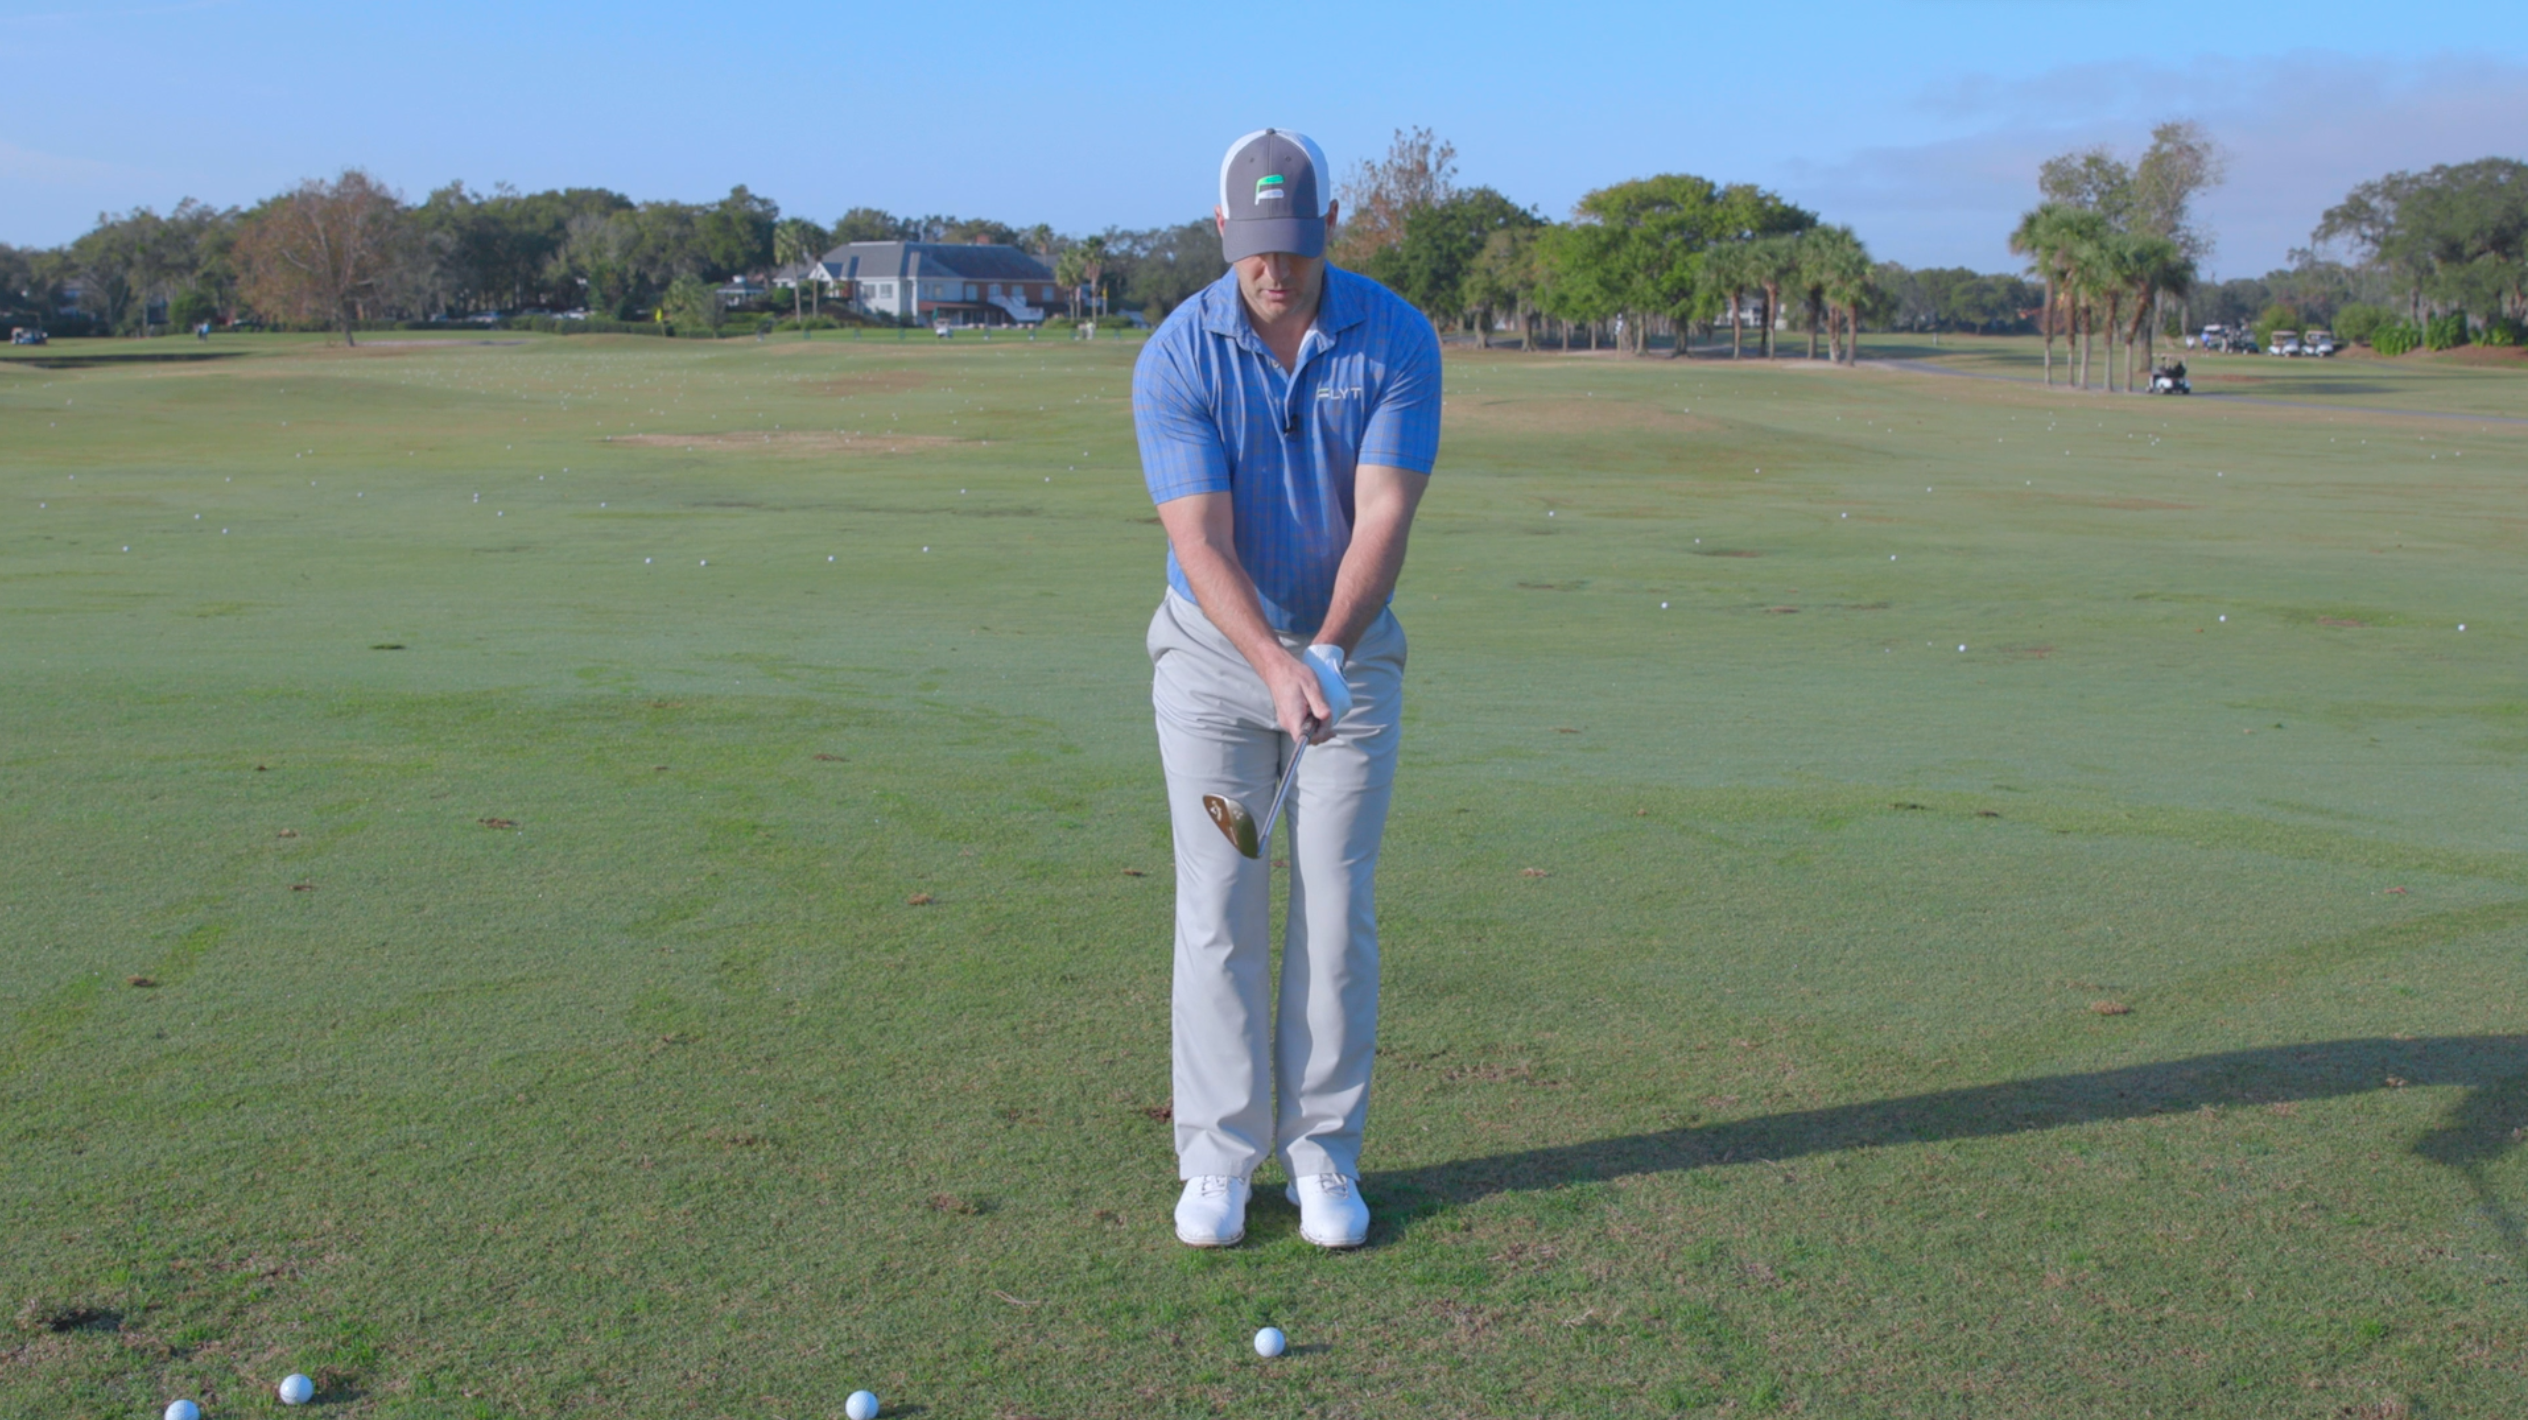 Chipping Downwind: Adjusting Your Grip